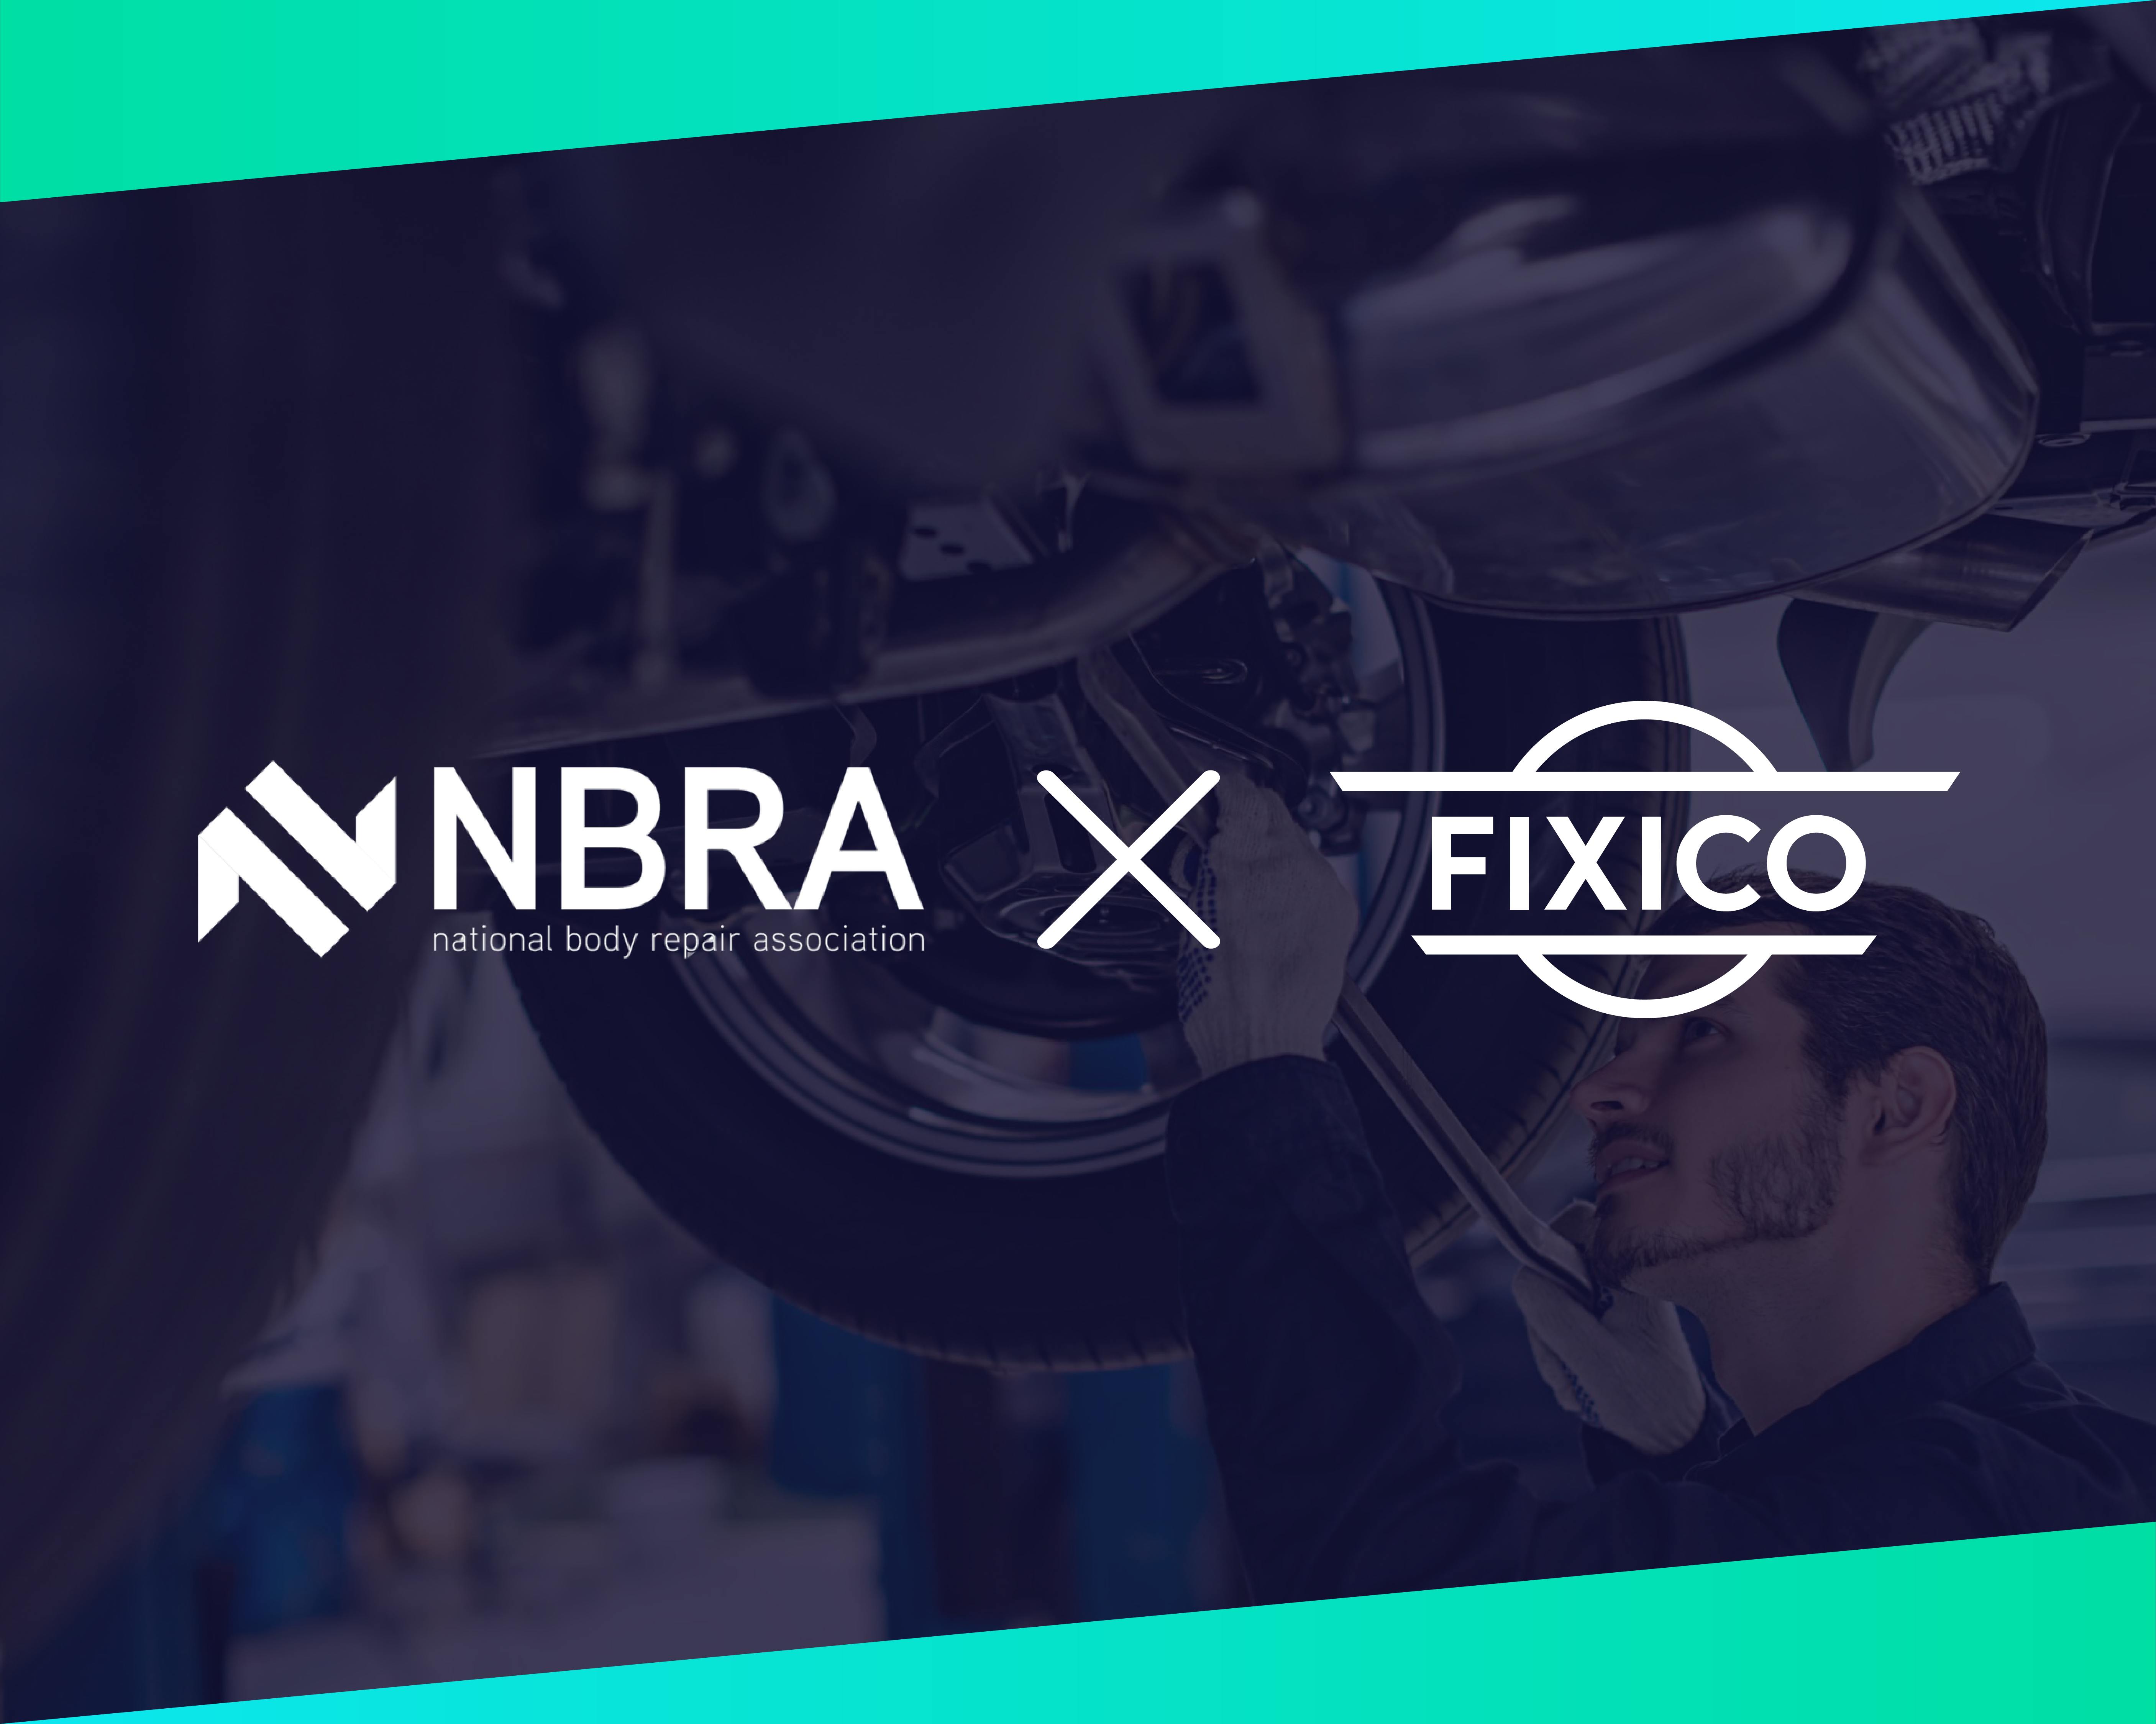 NBRA and Fixico partner to empower repairers and enhance customer experience